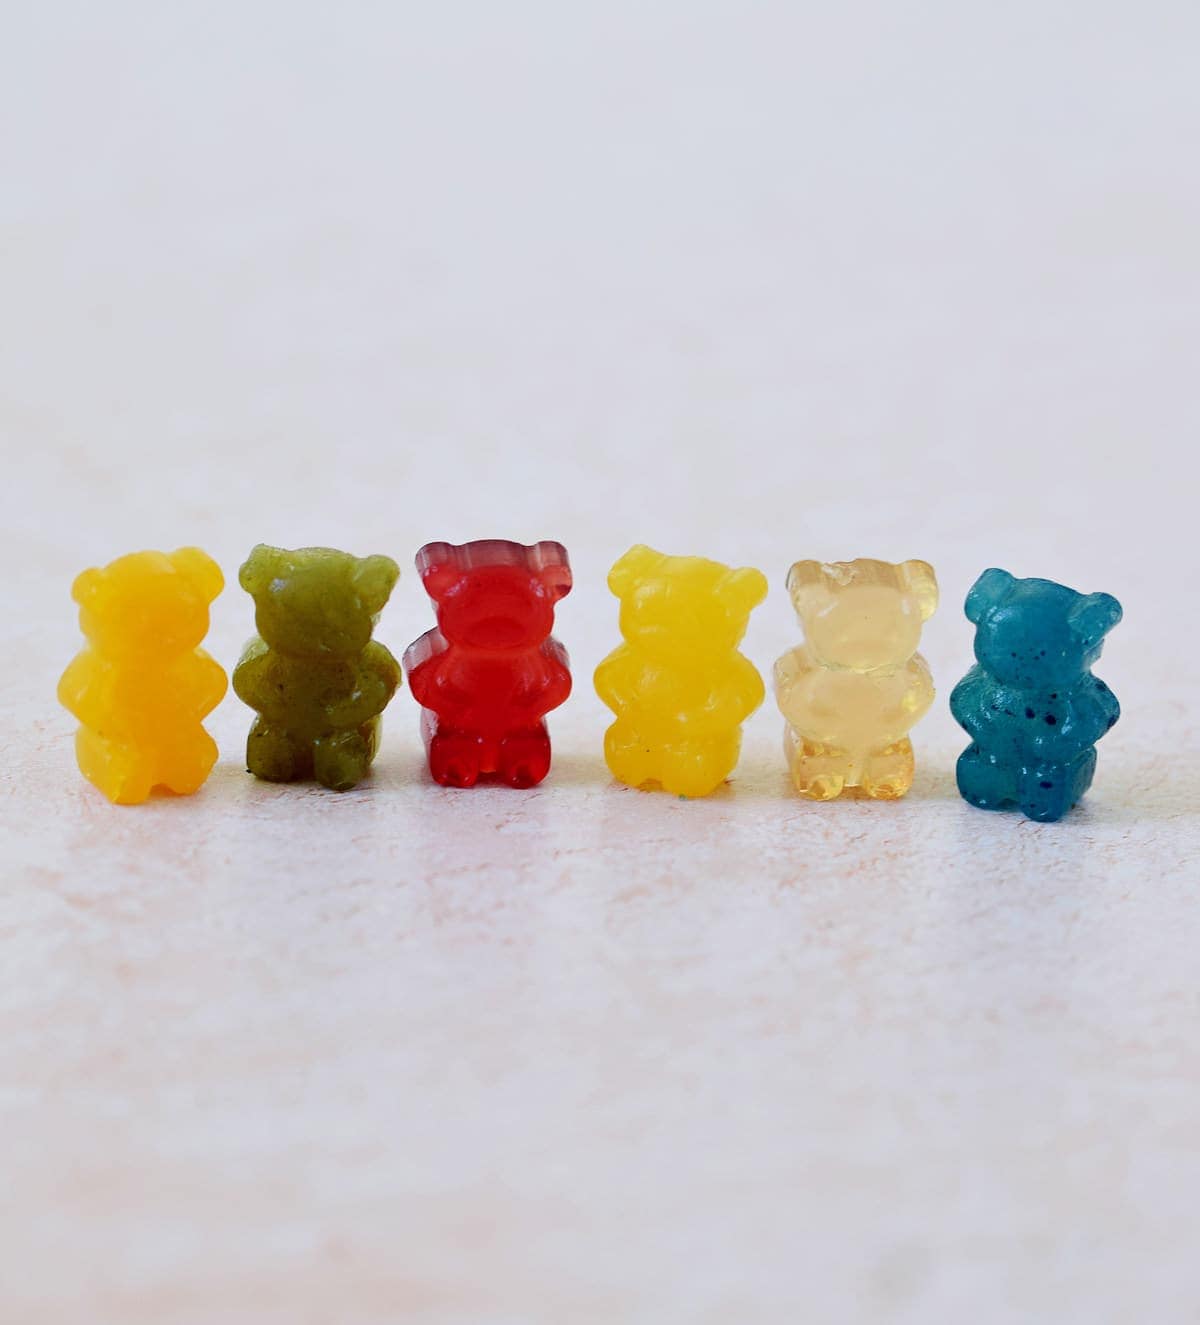 6 vegan gummy bears in different colors in a row